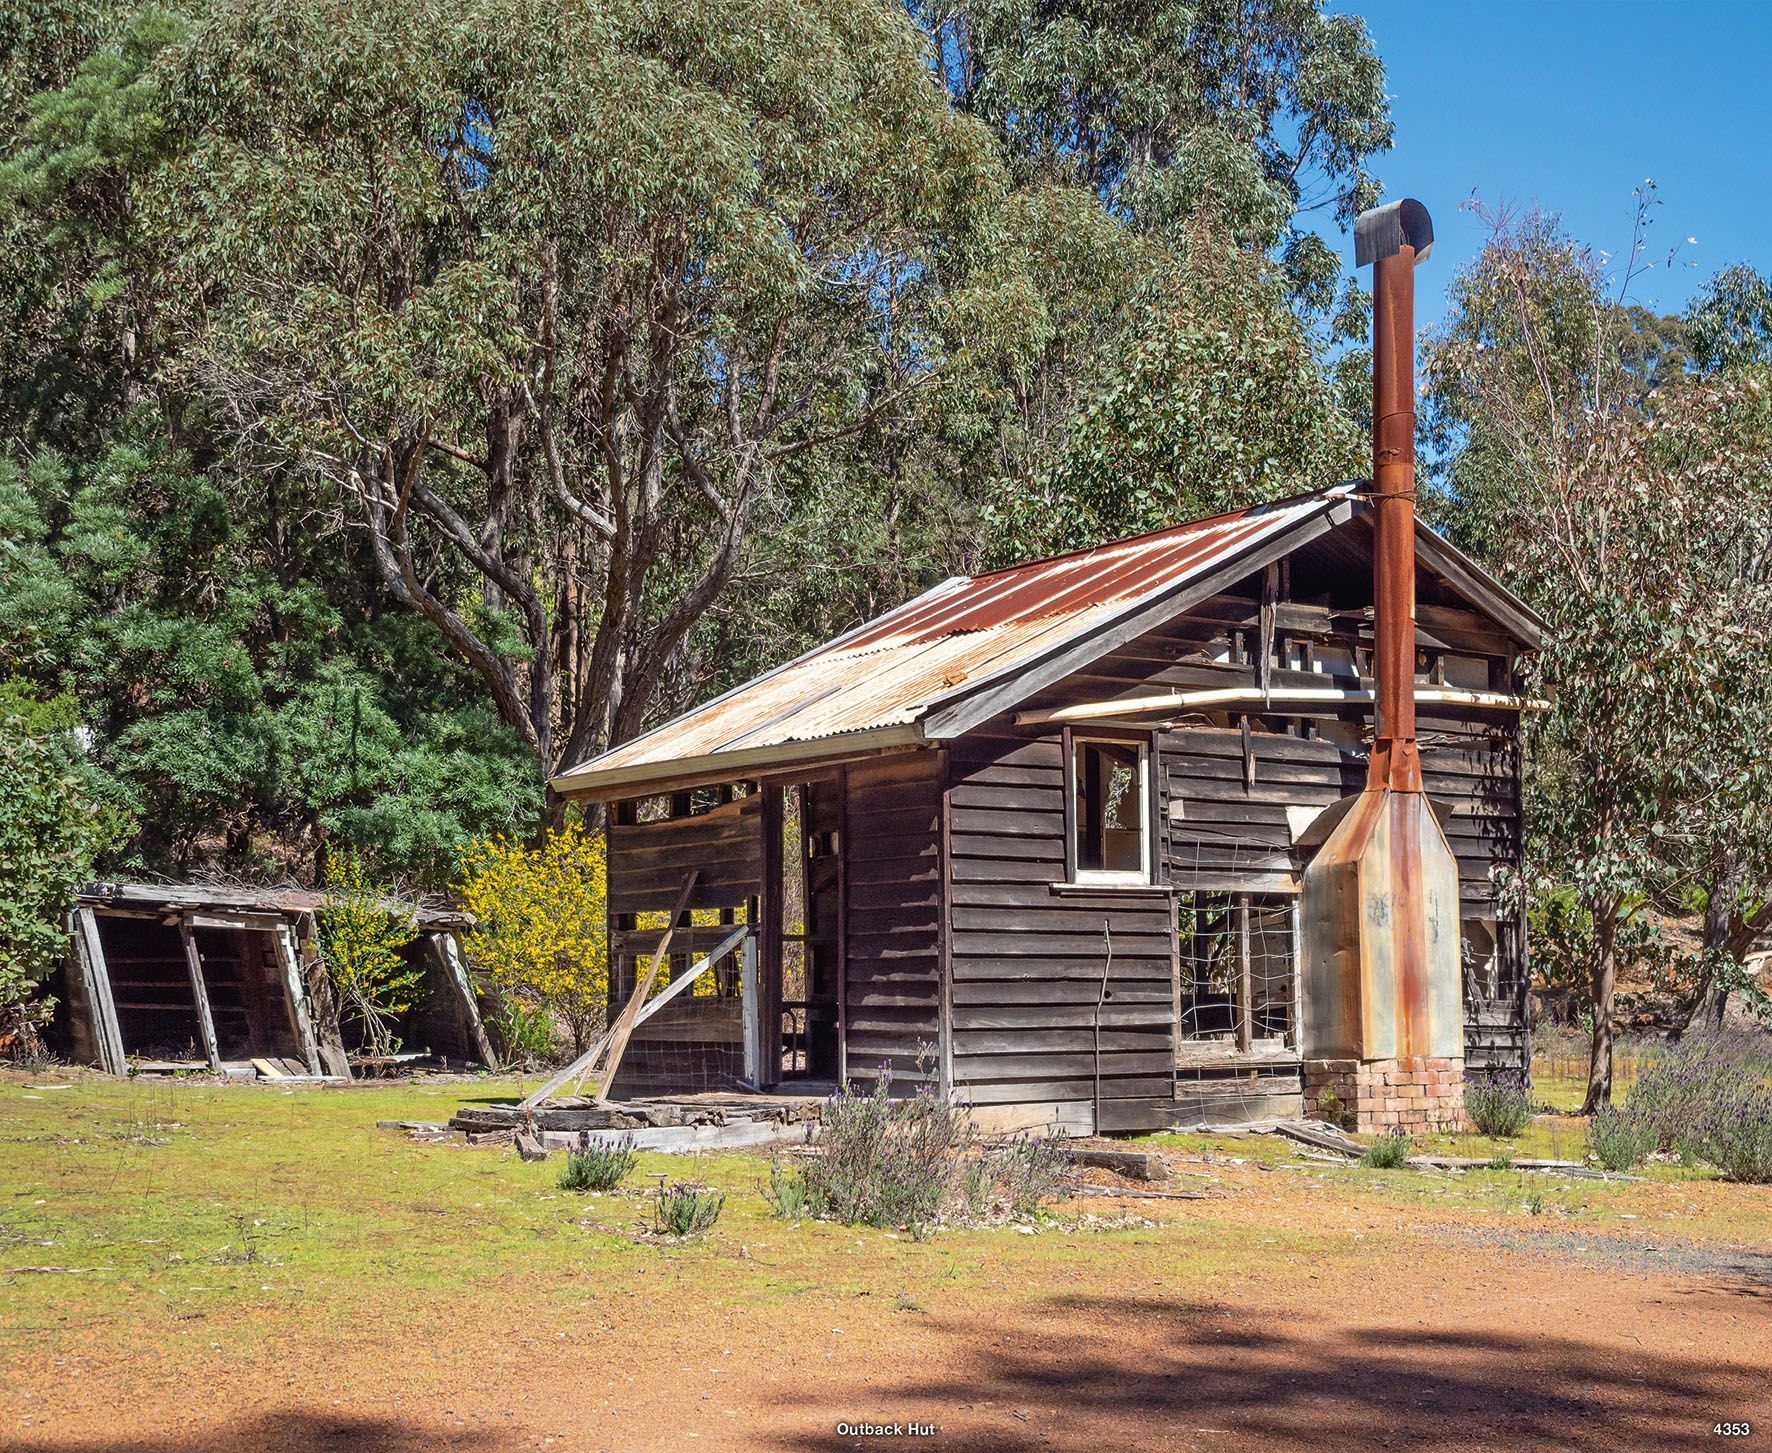 4353_Outback Hut